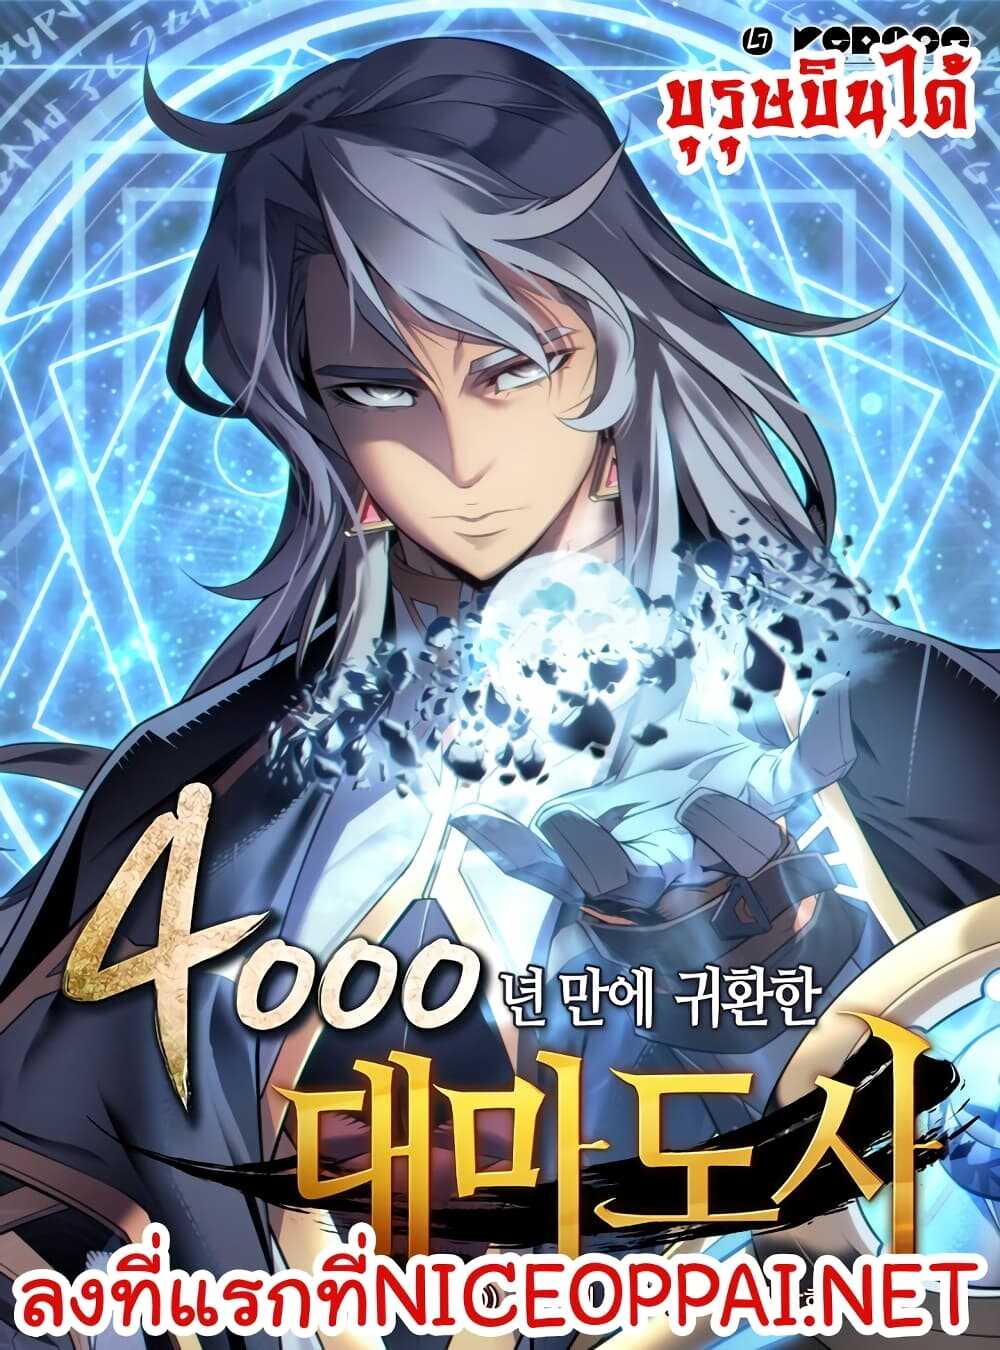 The Great Mage Returns After 4000 Years 25 (1)